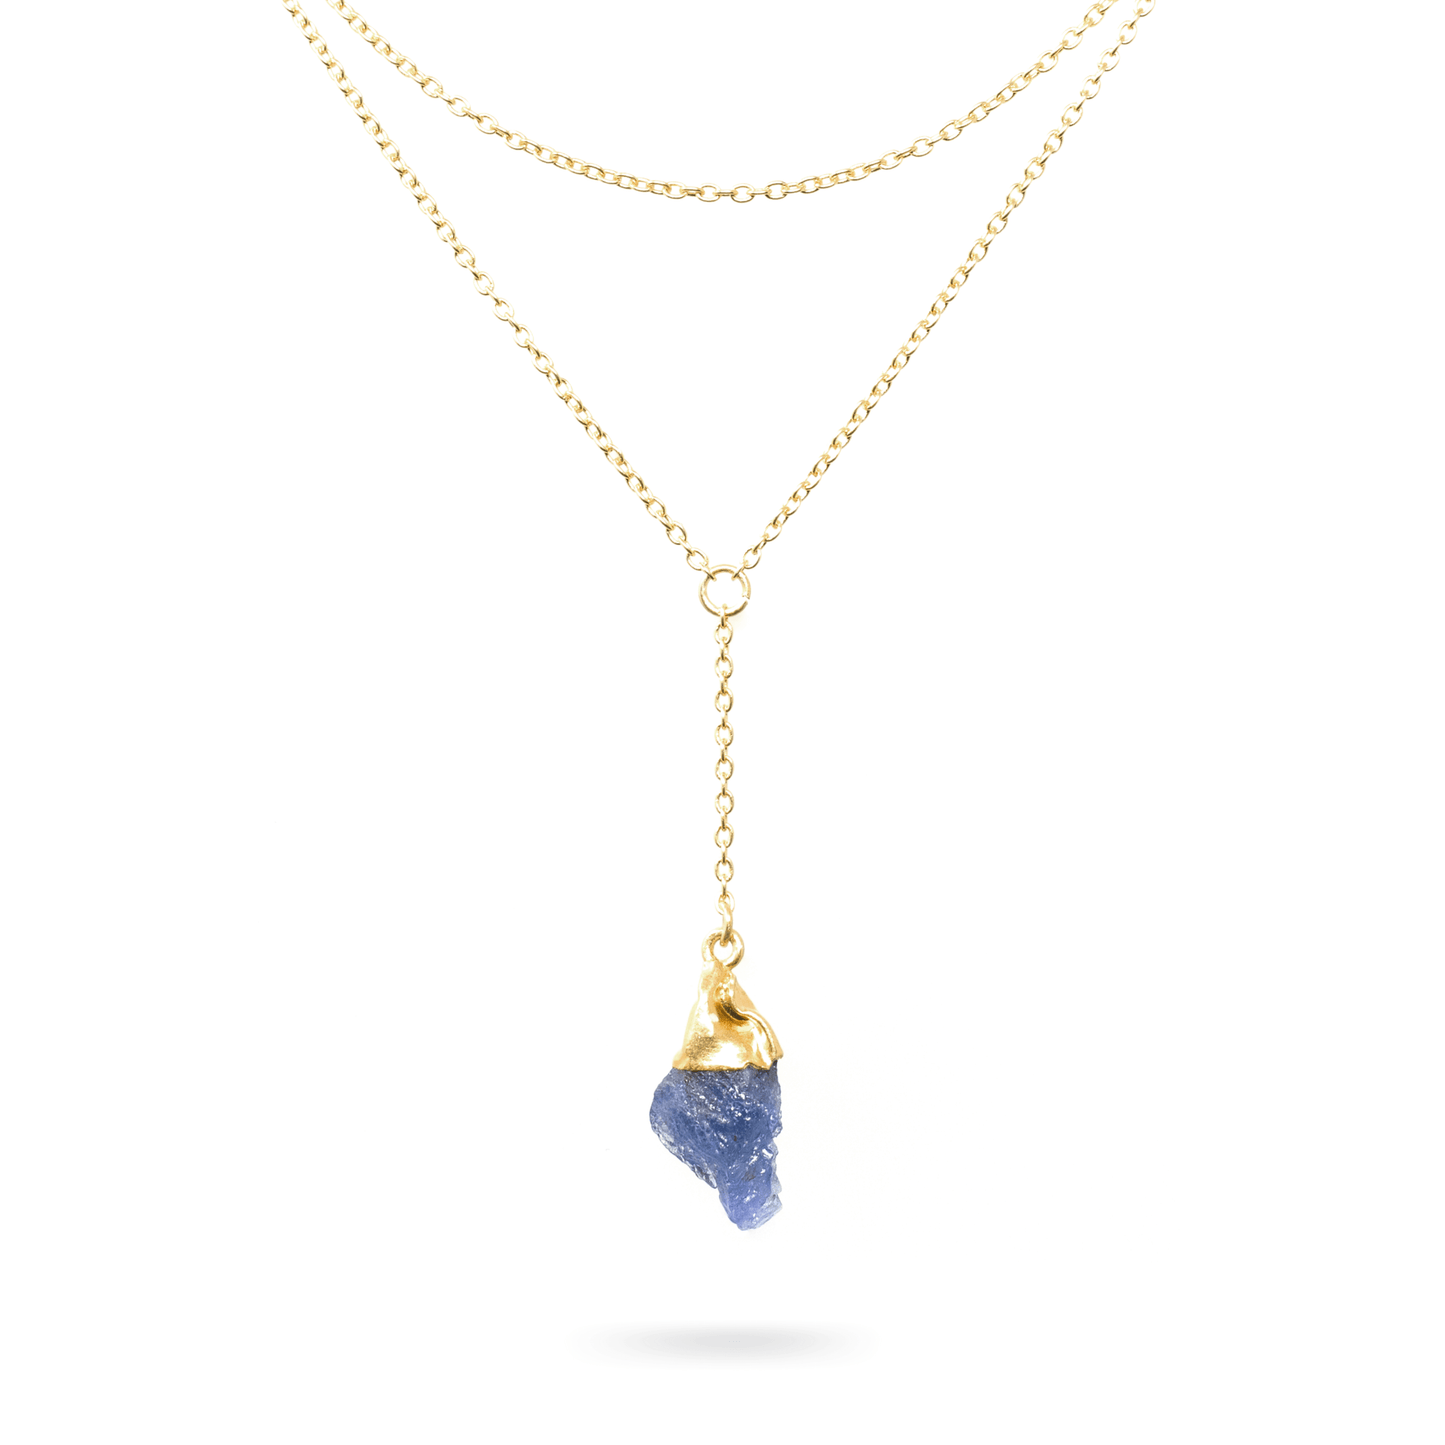 Raw Tanzanite 2-Layer 18K Gold Necklace | December Birthstone Necklaces [Handmade & Ships from Boise, ID]